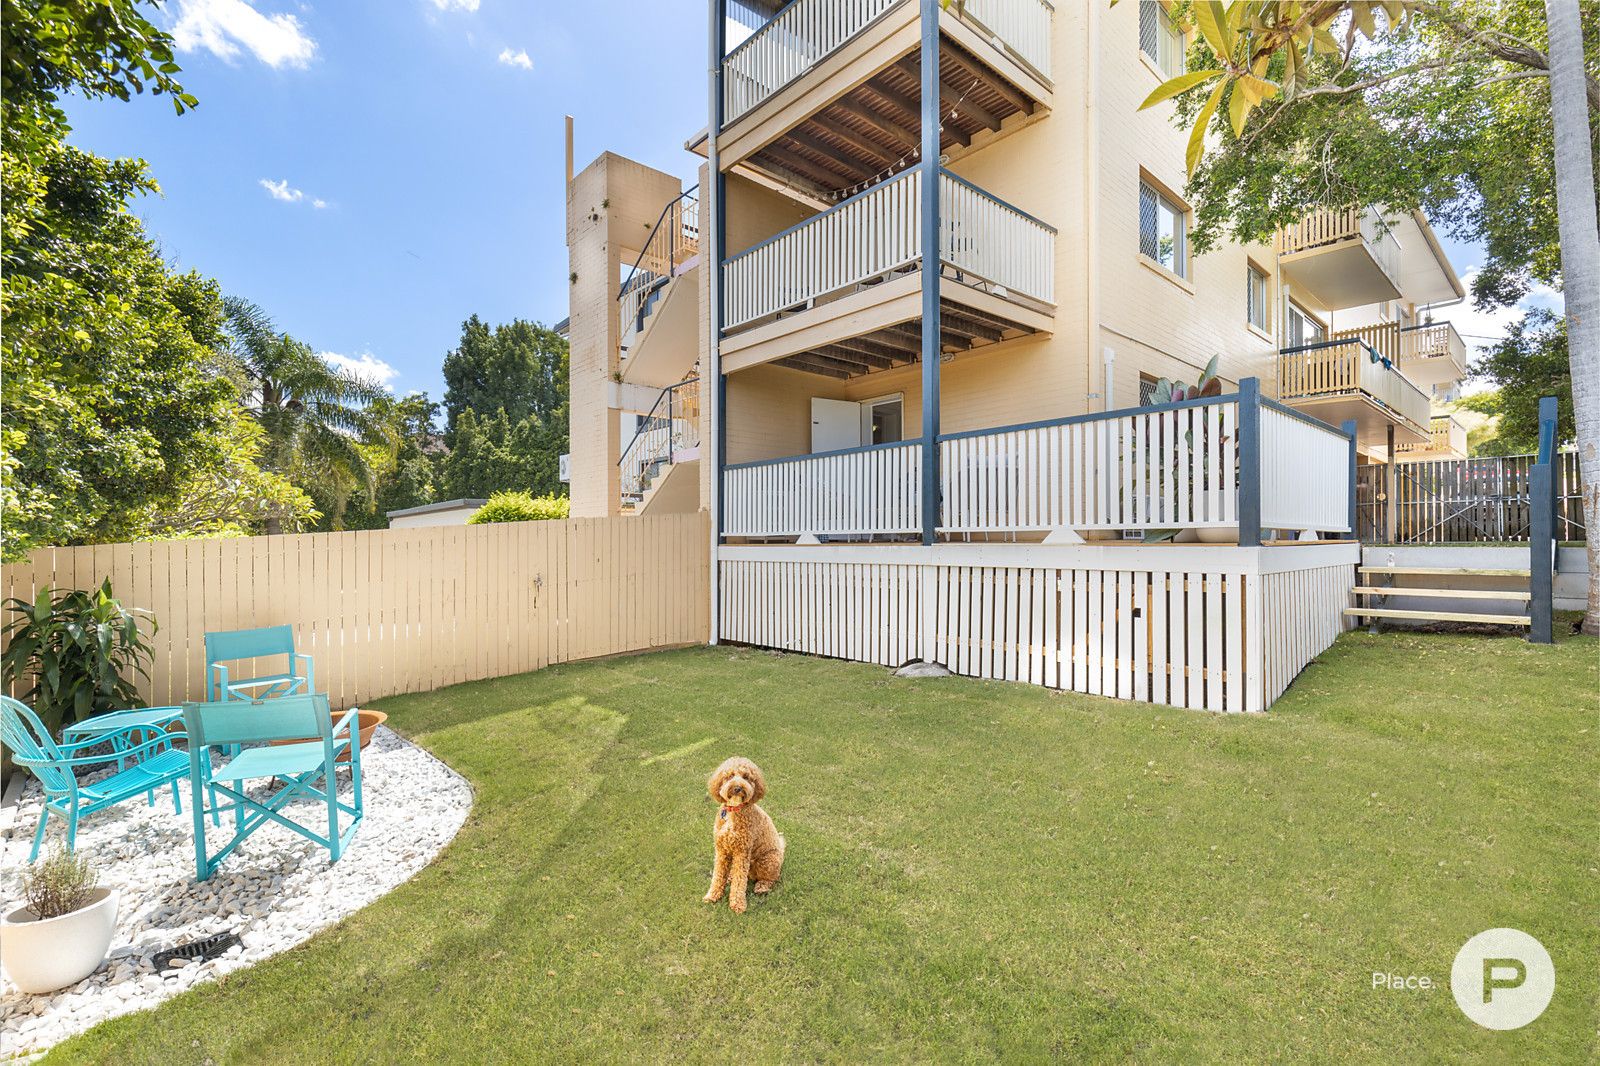 1/32 Miles Street, Clayfield QLD 4011, Image 0